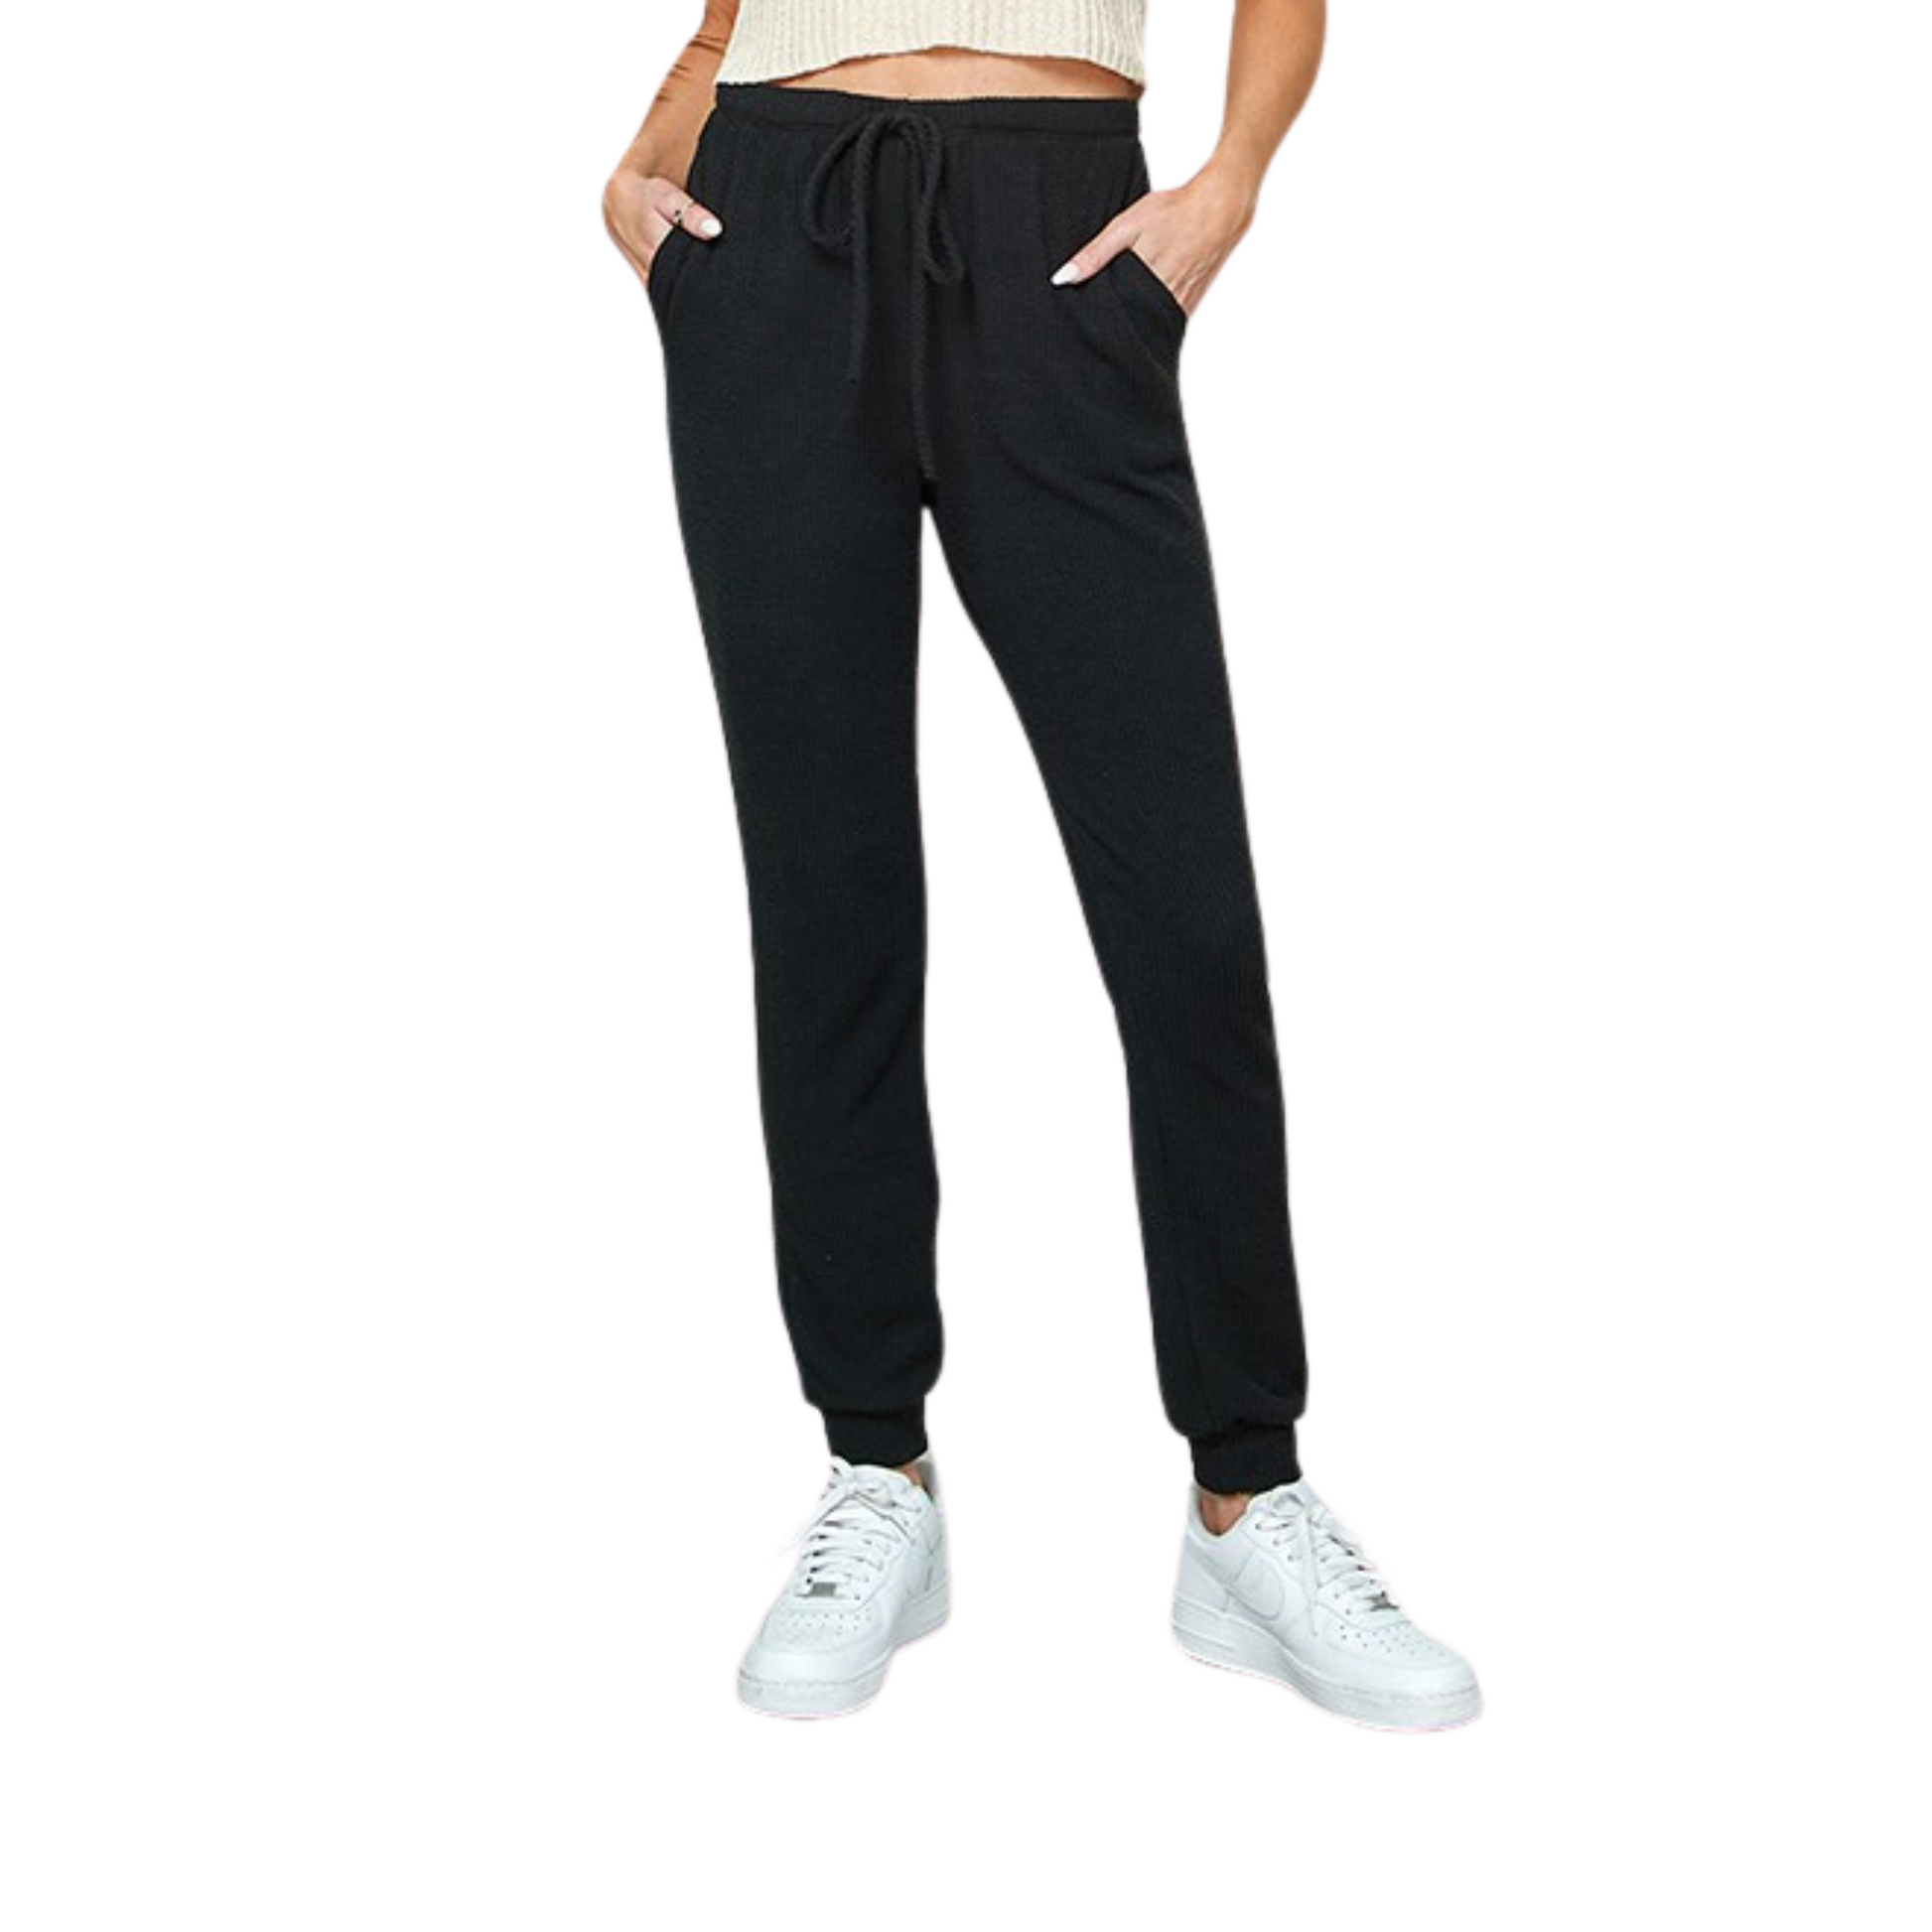 Stay comfortable and stylish with our Casual Jogging Pants. Made with a soft knit material, these full-length joggers are perfect for everyday wear. The classic black color adds a touch of versatility to your wardrobe. Look effortlessly cool in these casual pants.